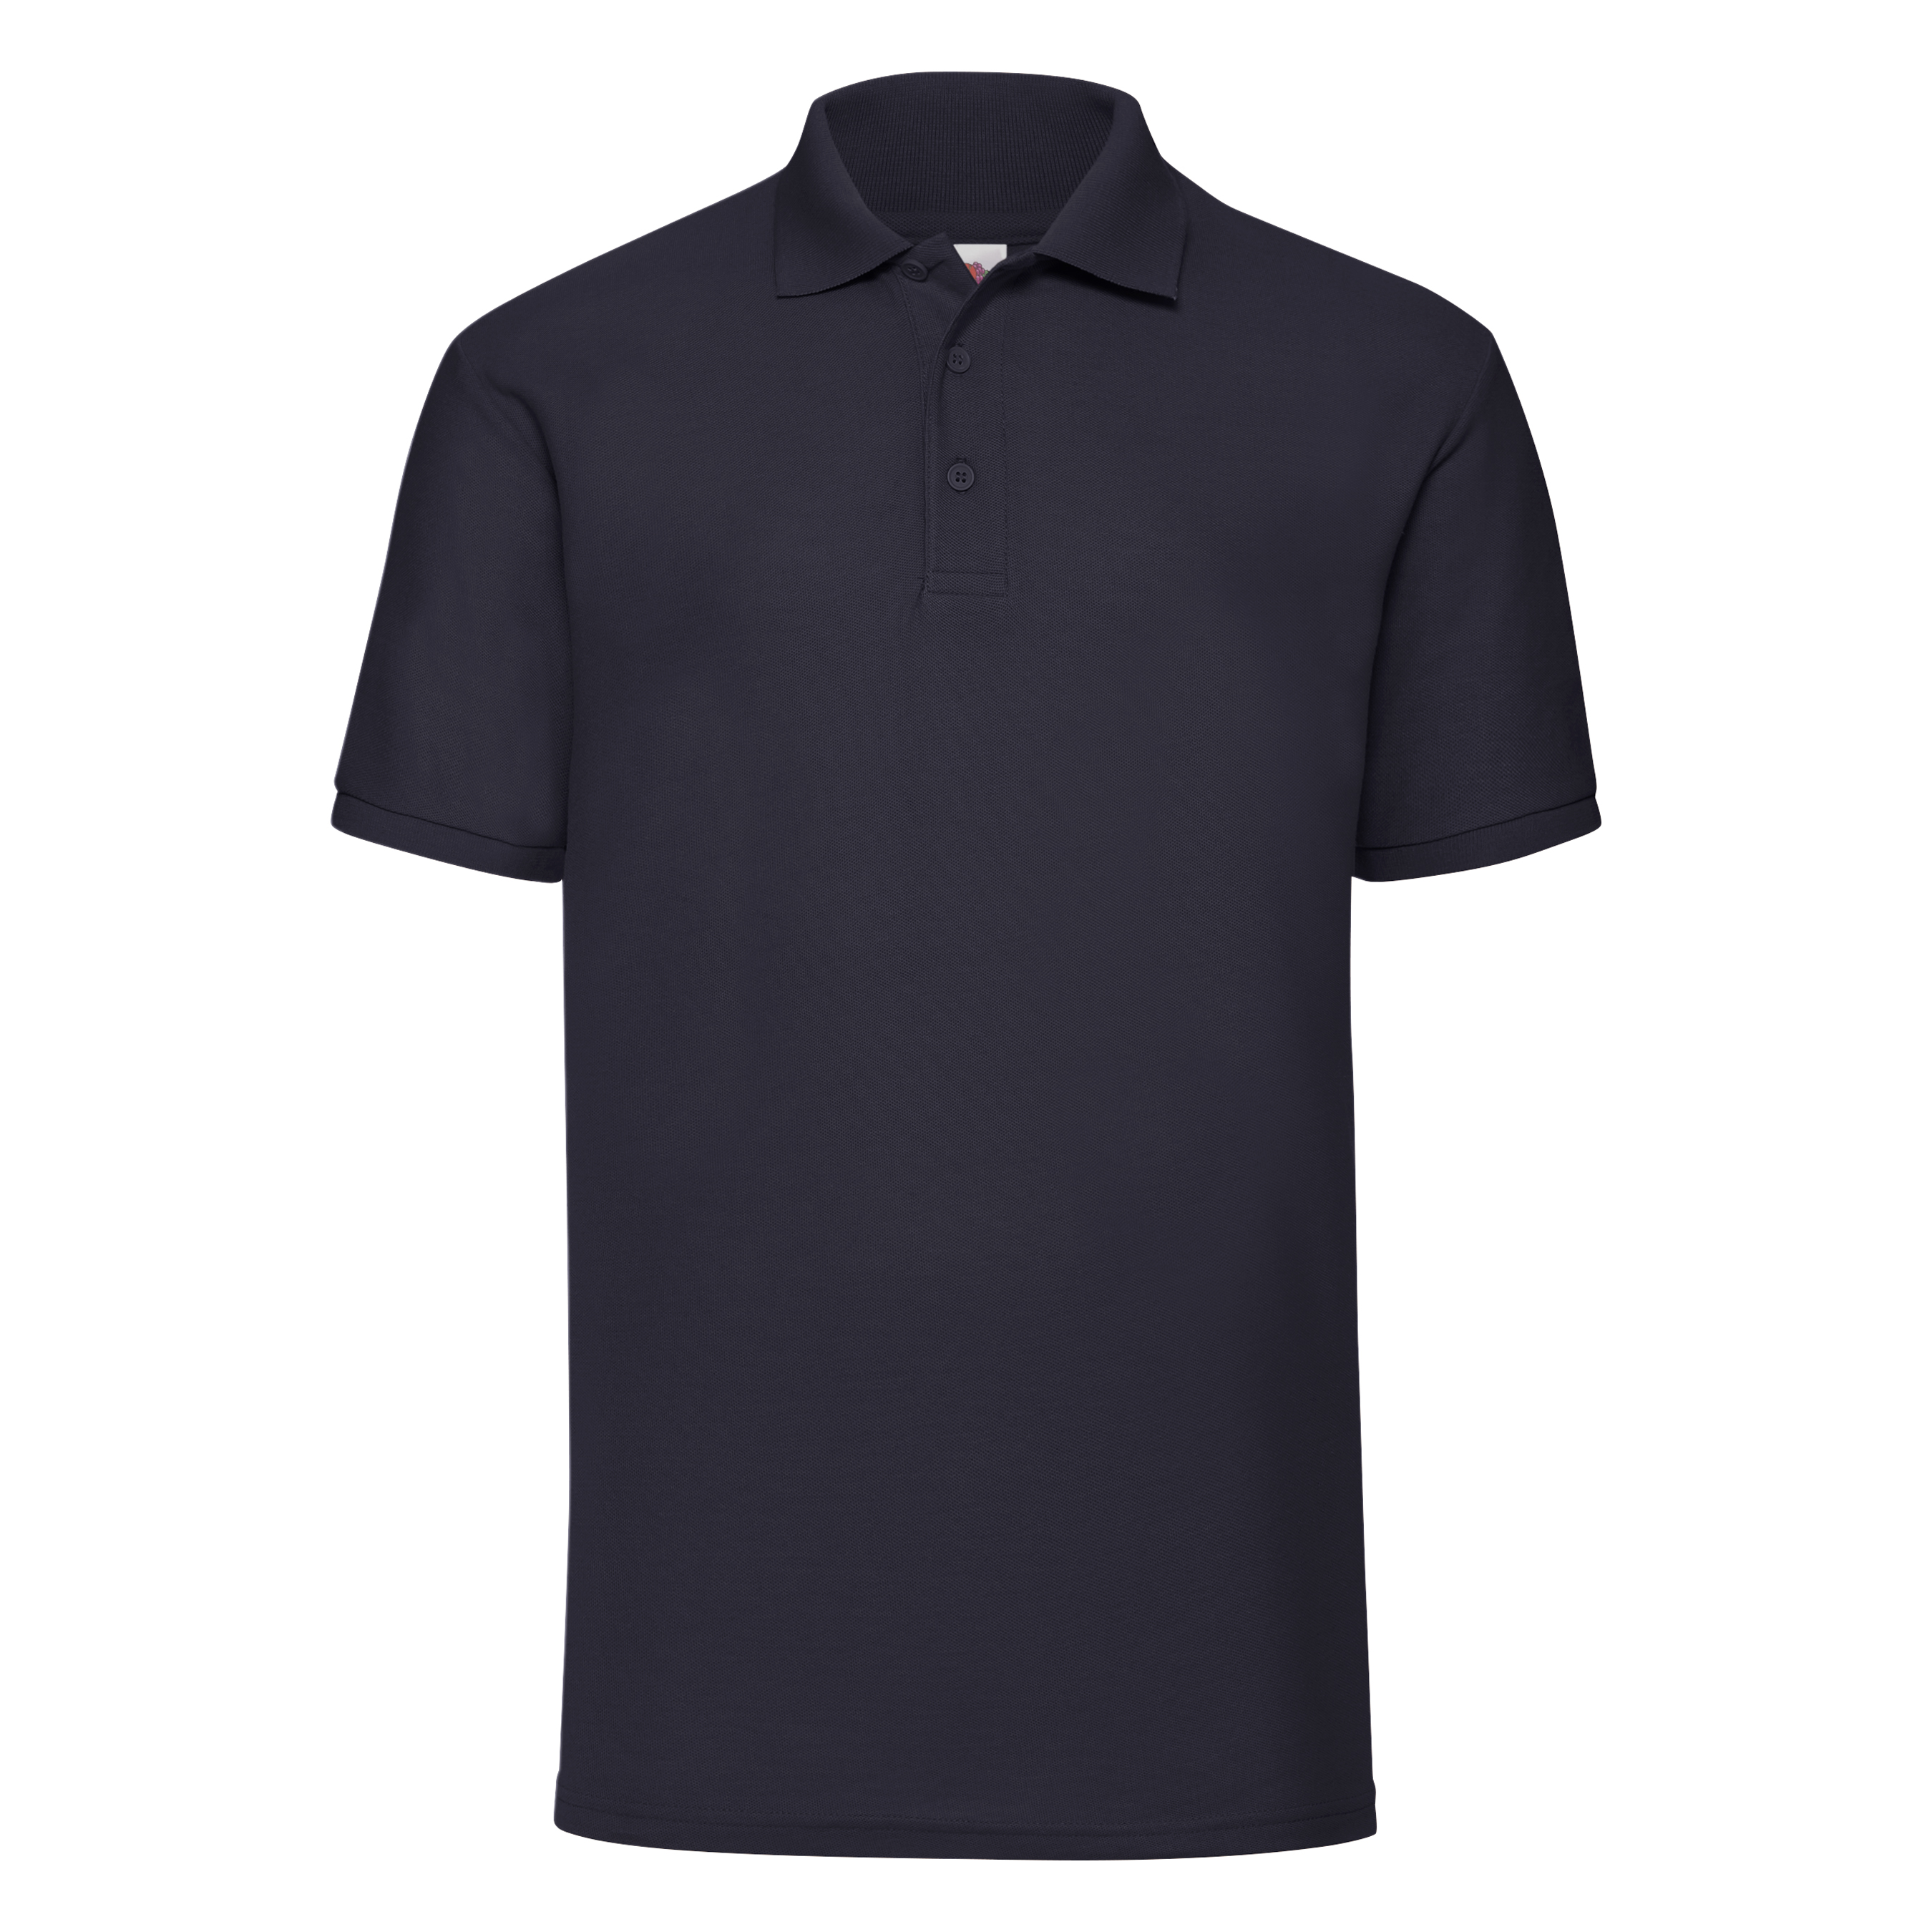 ax-httpswebsystems.s3.amazonaws.comtmp_for_downloadfruit-of-the-loom-65-35-polo-deep-navy.jpg